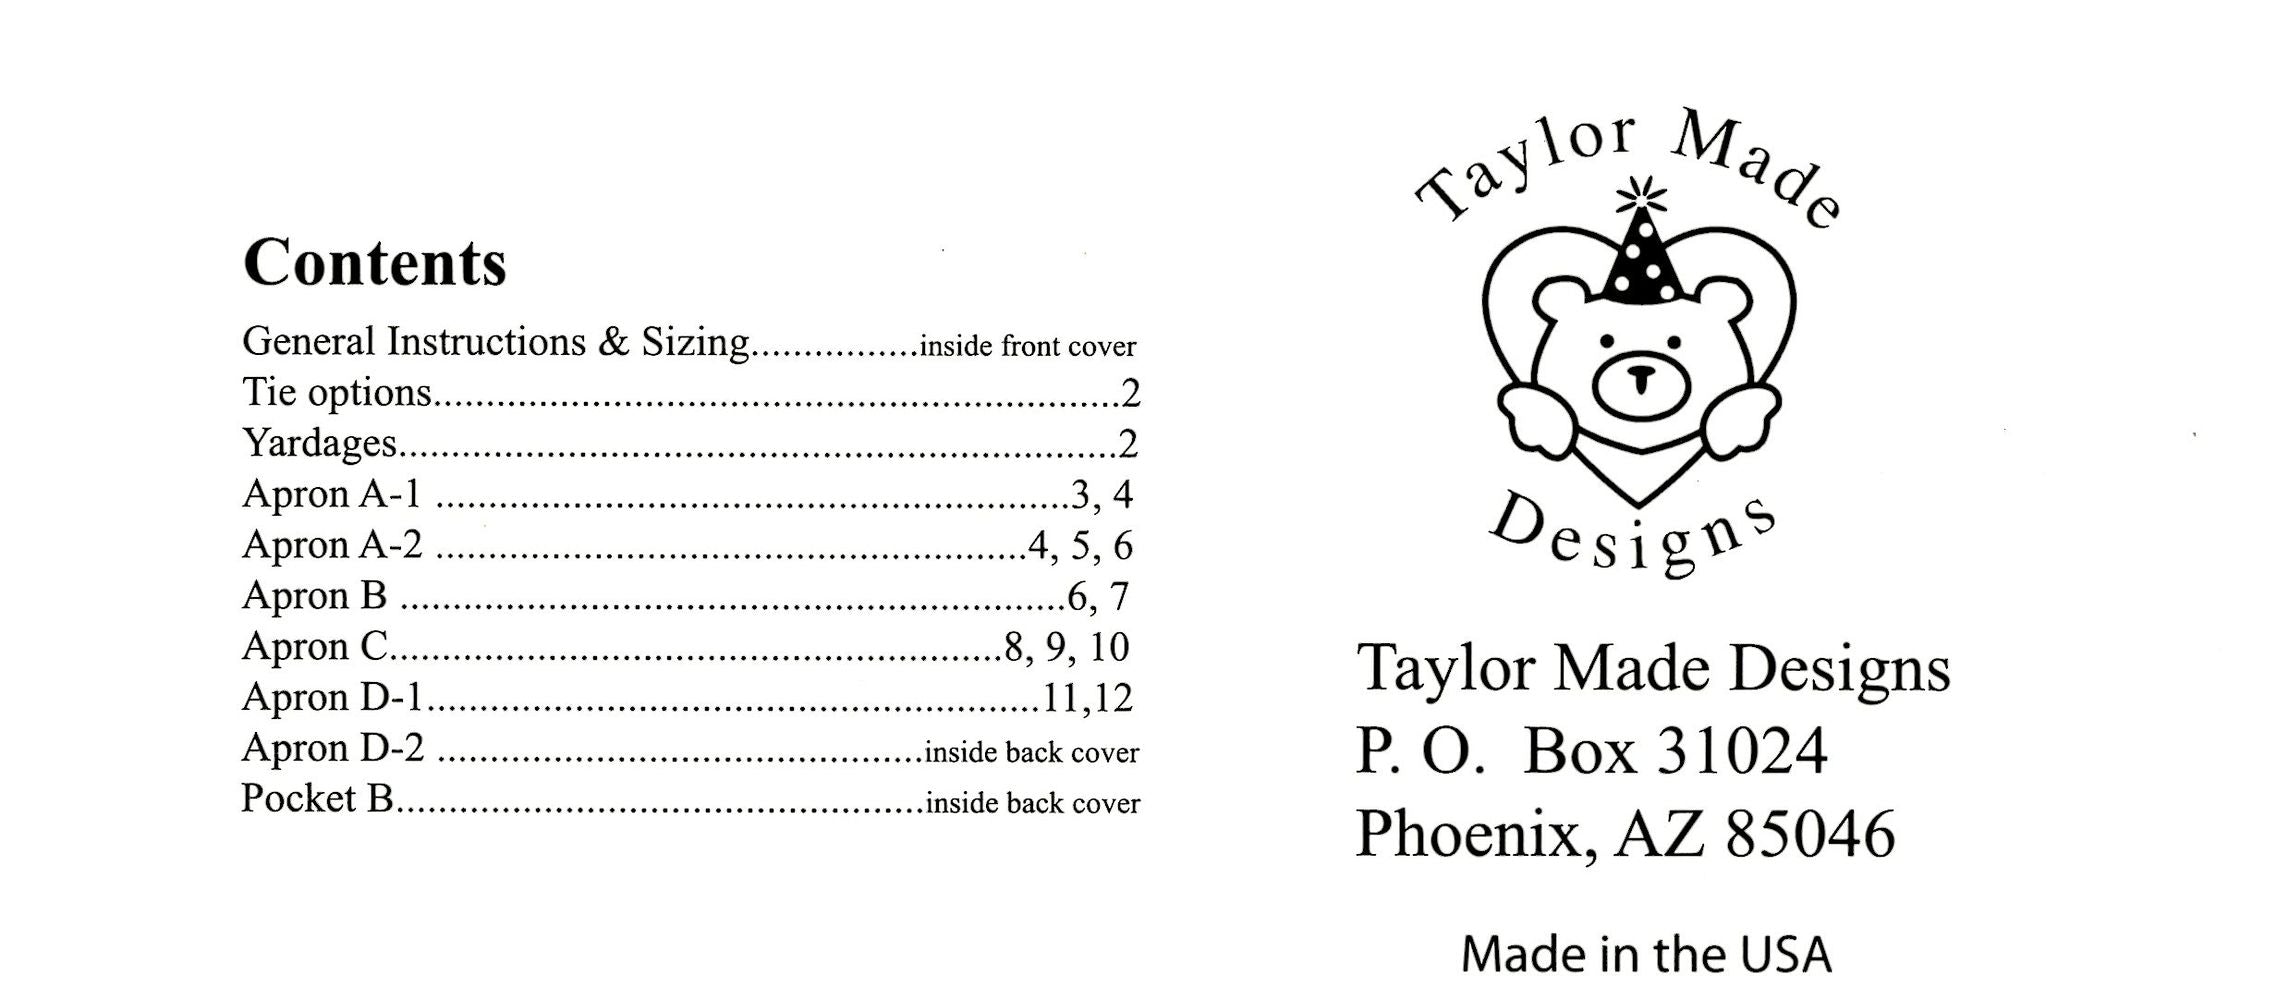 More Retro Aprons Sewing Pattern Book by Cindy Taylor Oates of Taylor Made Designs